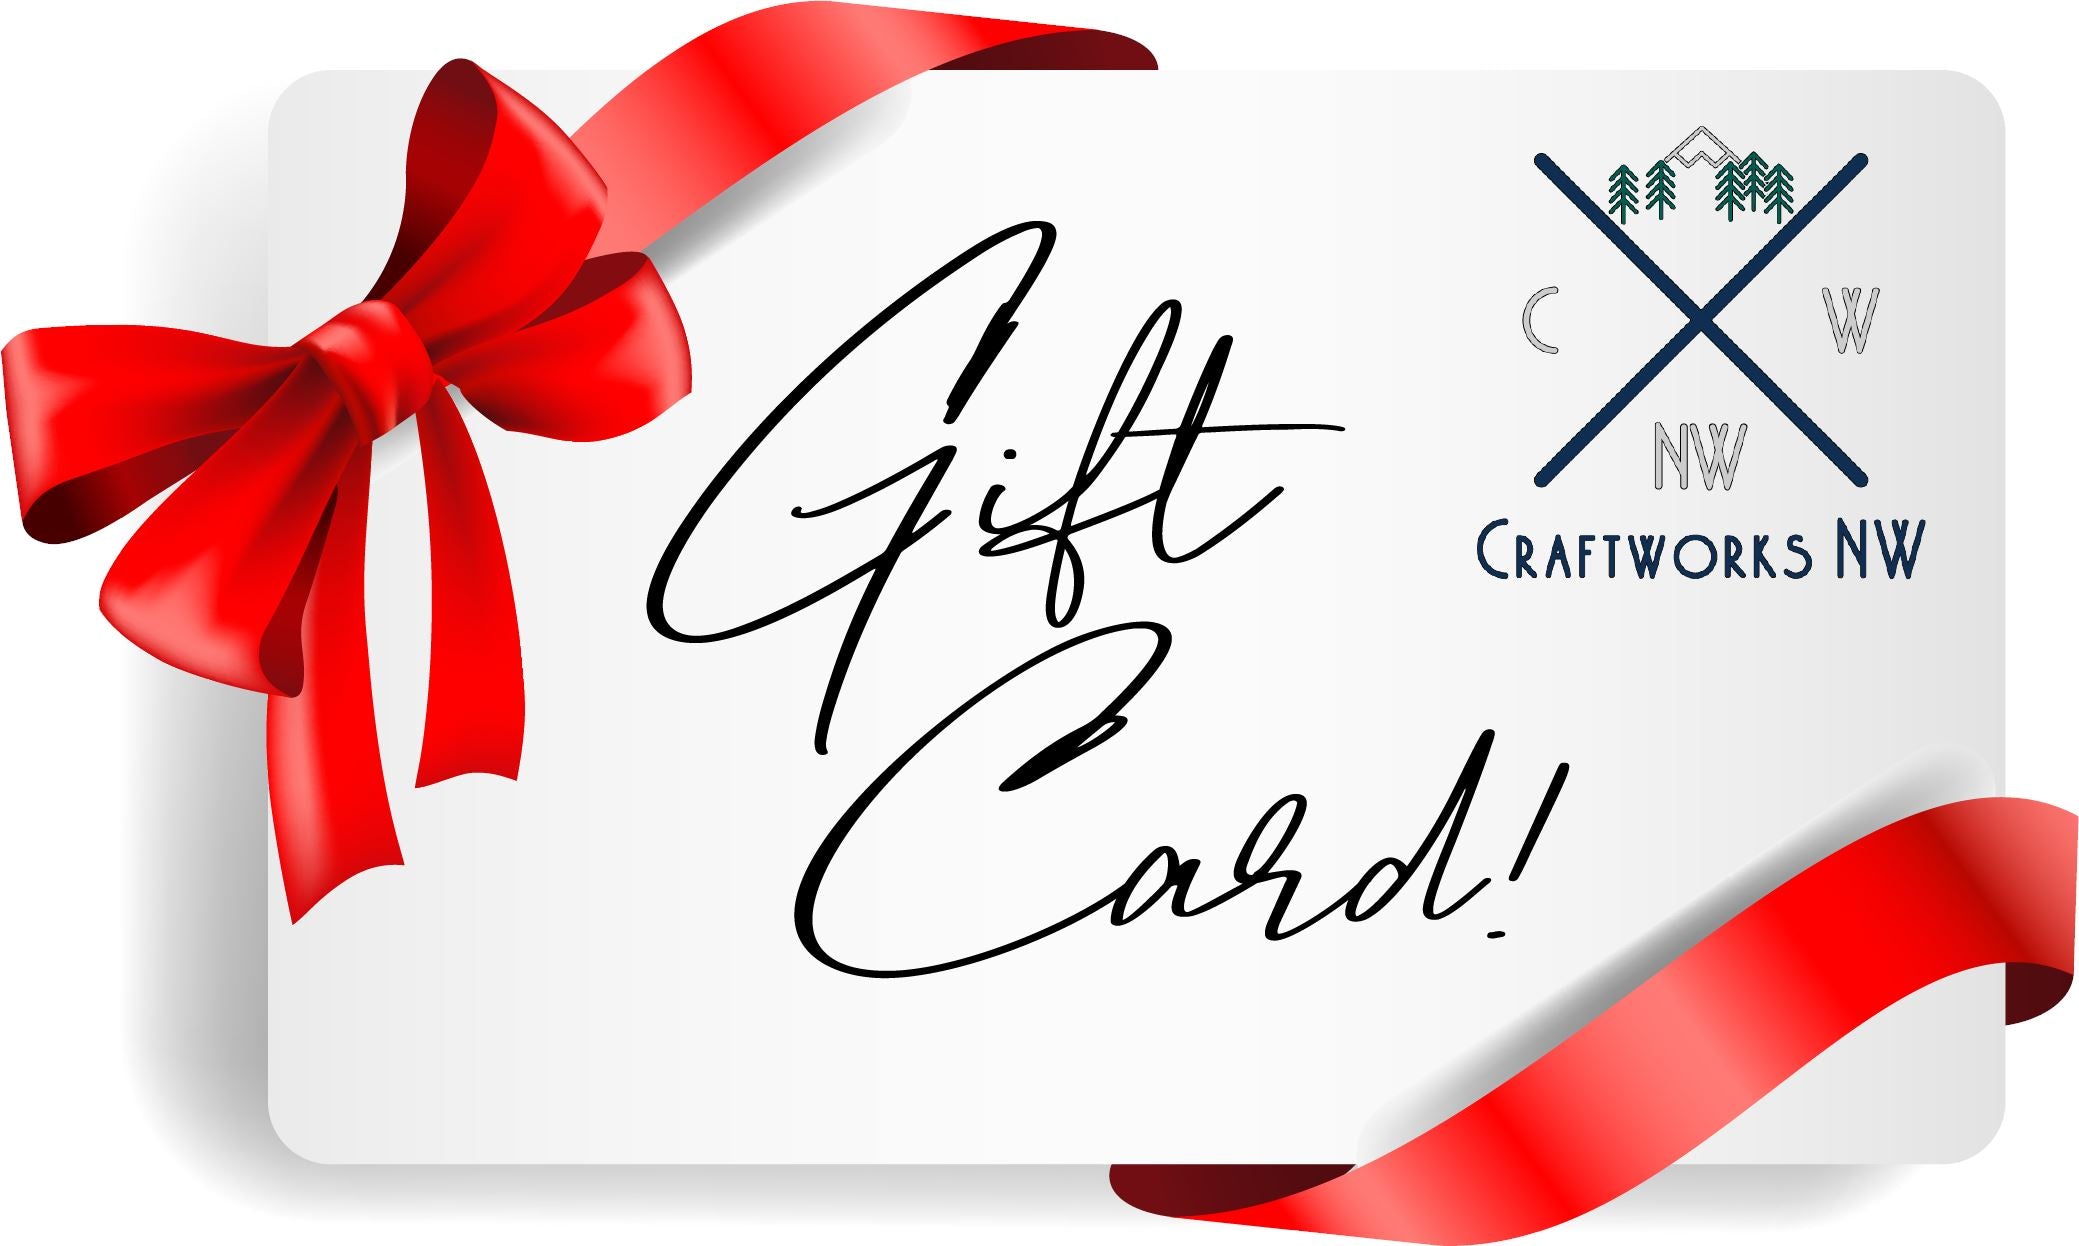 Craftworks NW Gift Cards! - Craftworks NW, LLC